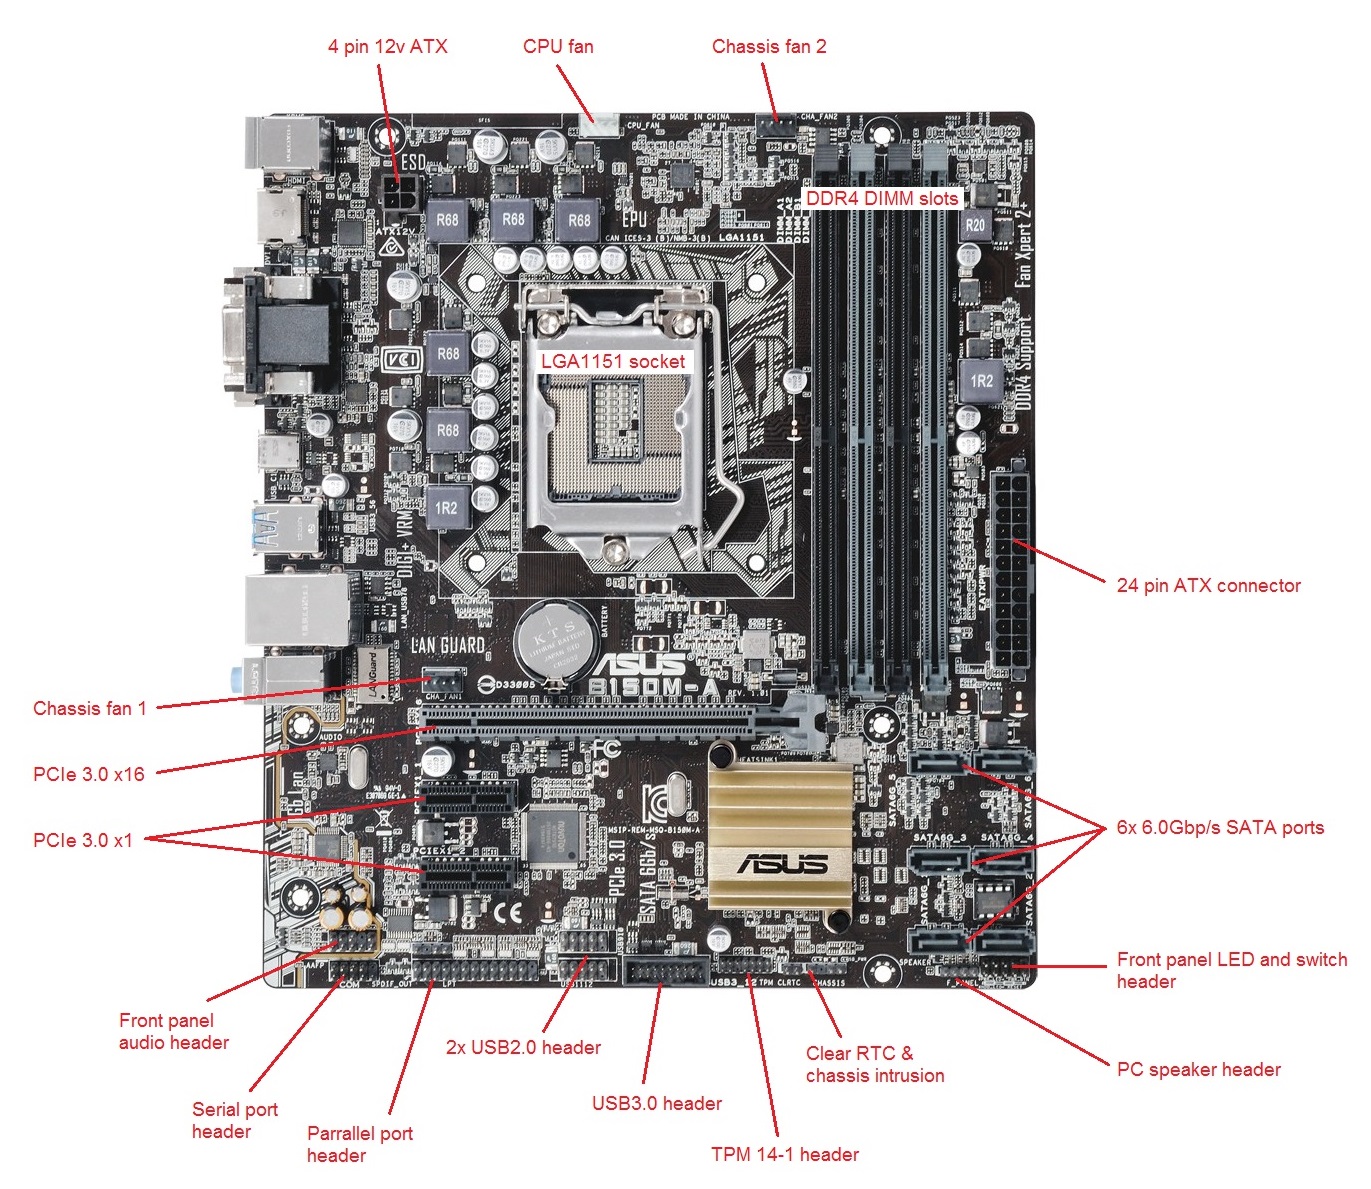 BOAMOT-480 - Stone / Asus B150M-A - Motherboard ... 6 connector wiring diagram 